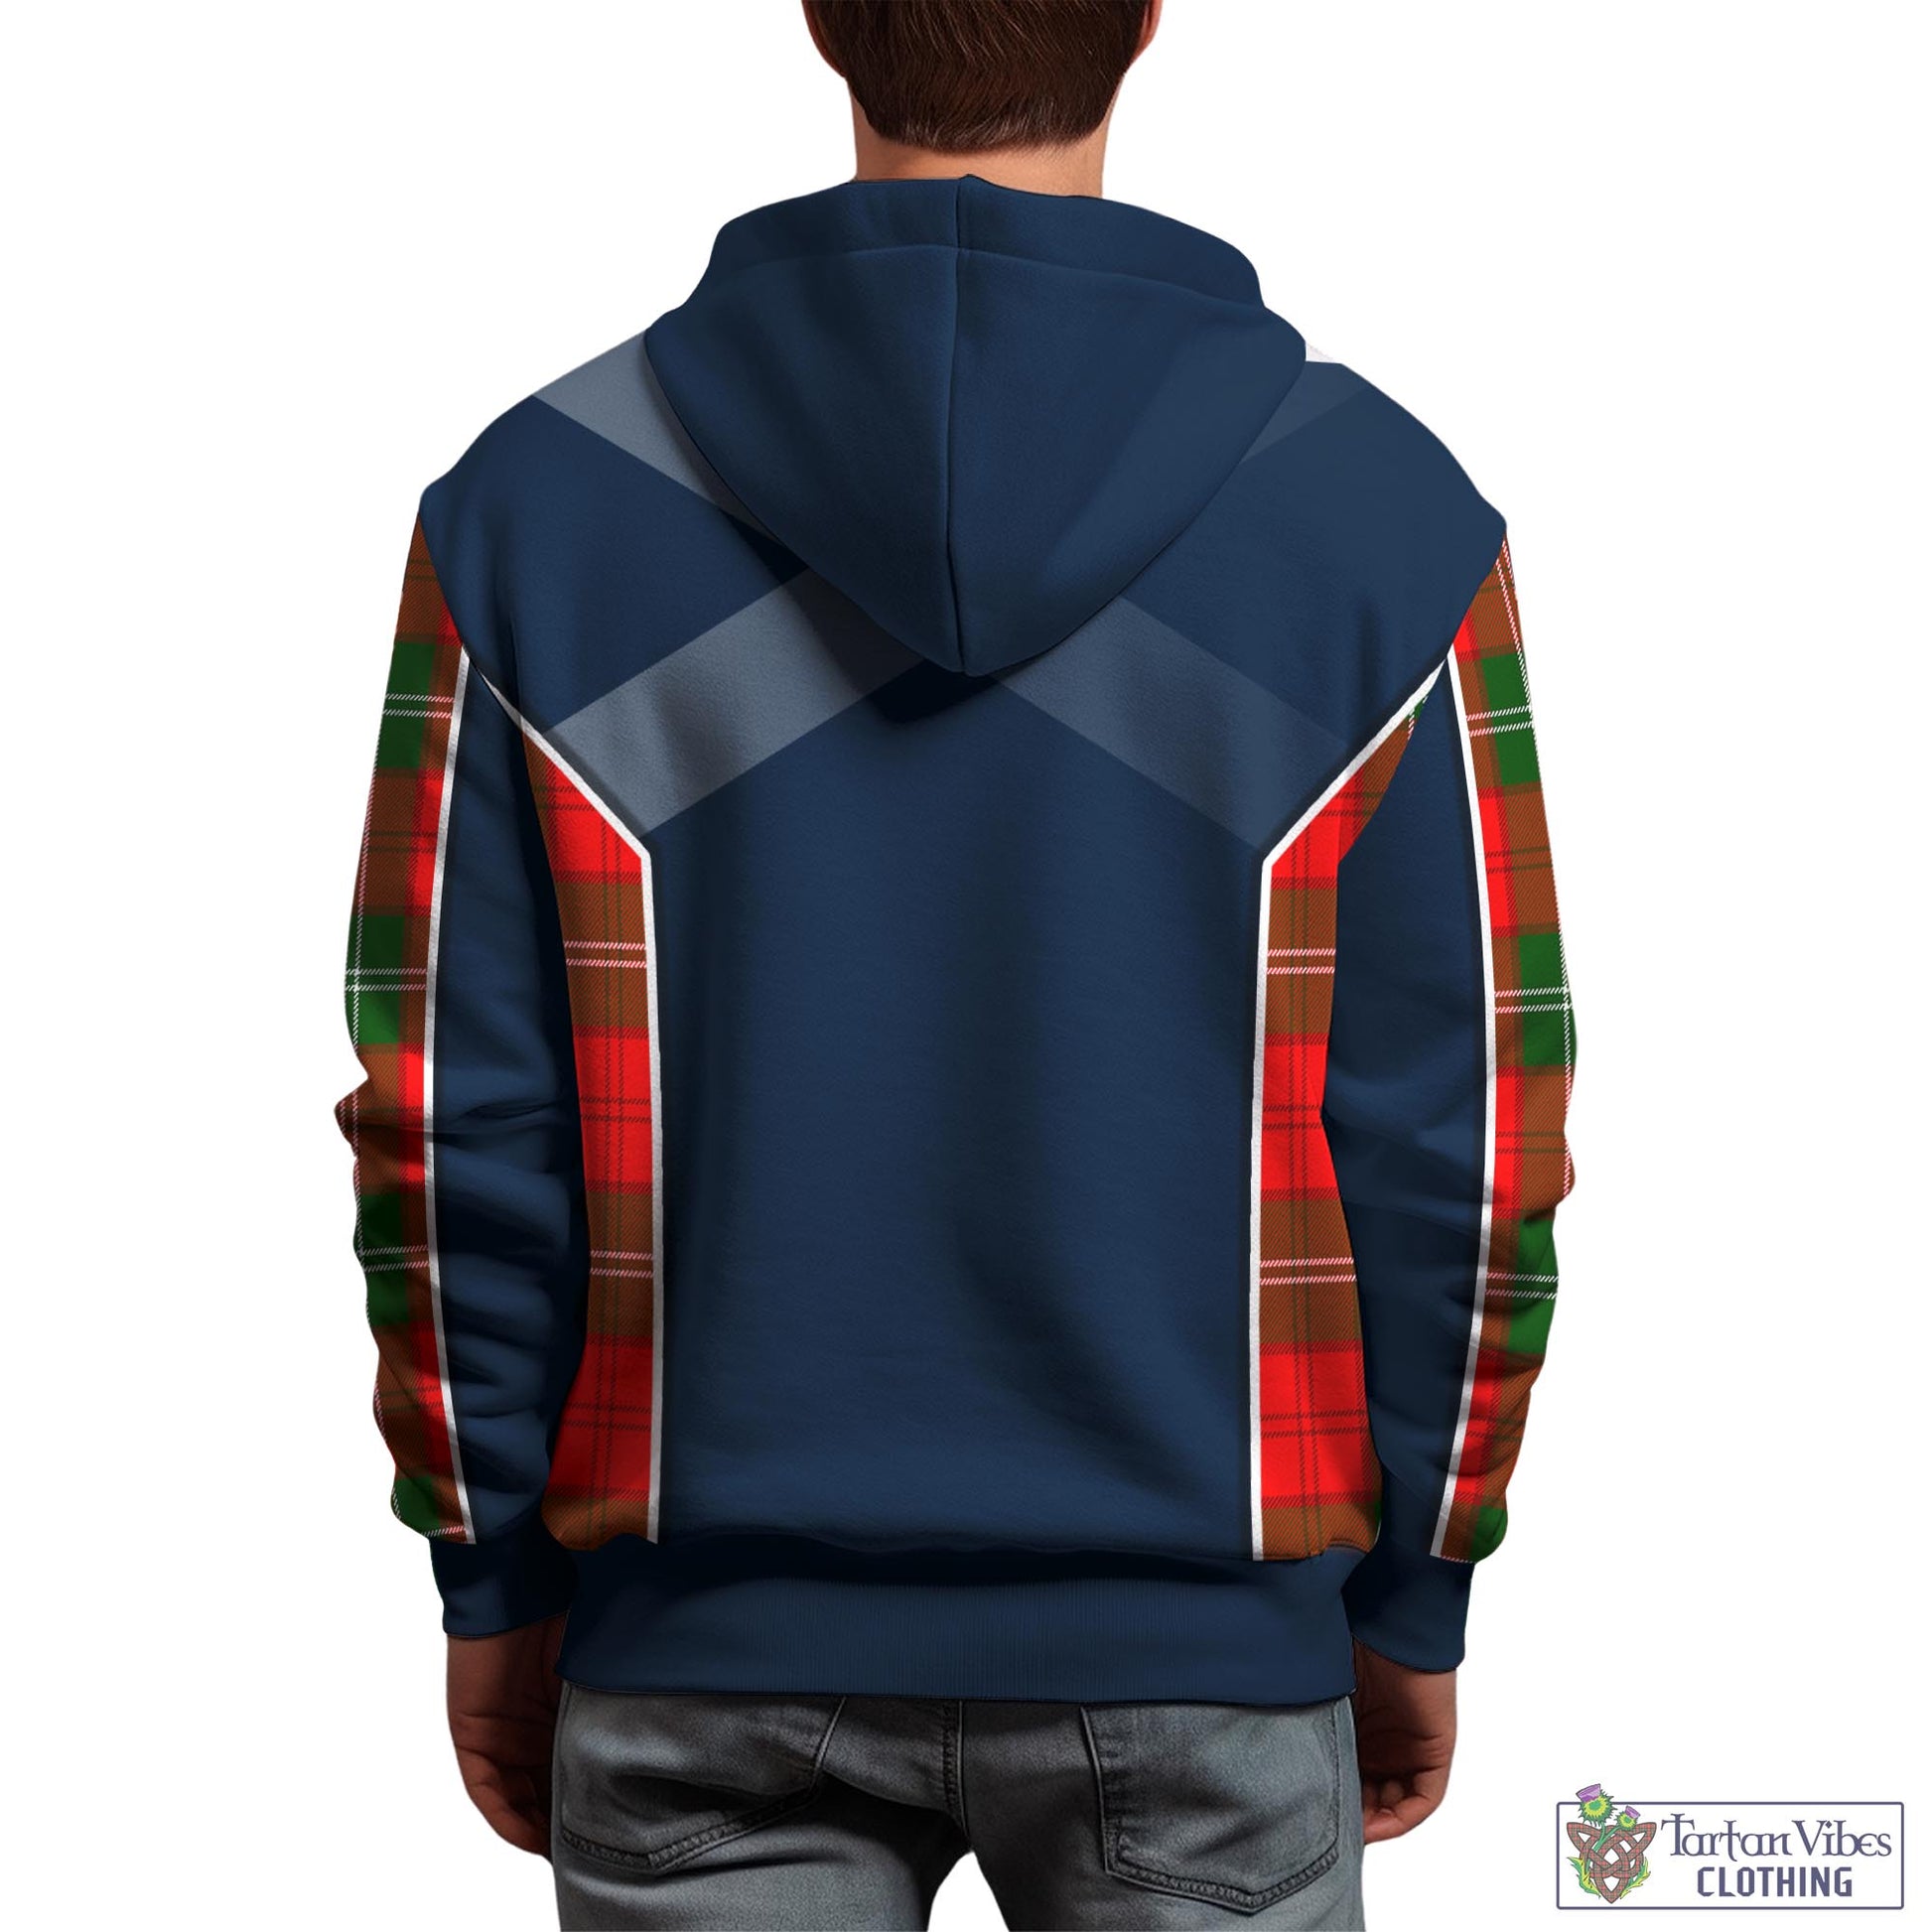 Tartan Vibes Clothing Gartshore Tartan Hoodie with Family Crest and Scottish Thistle Vibes Sport Style